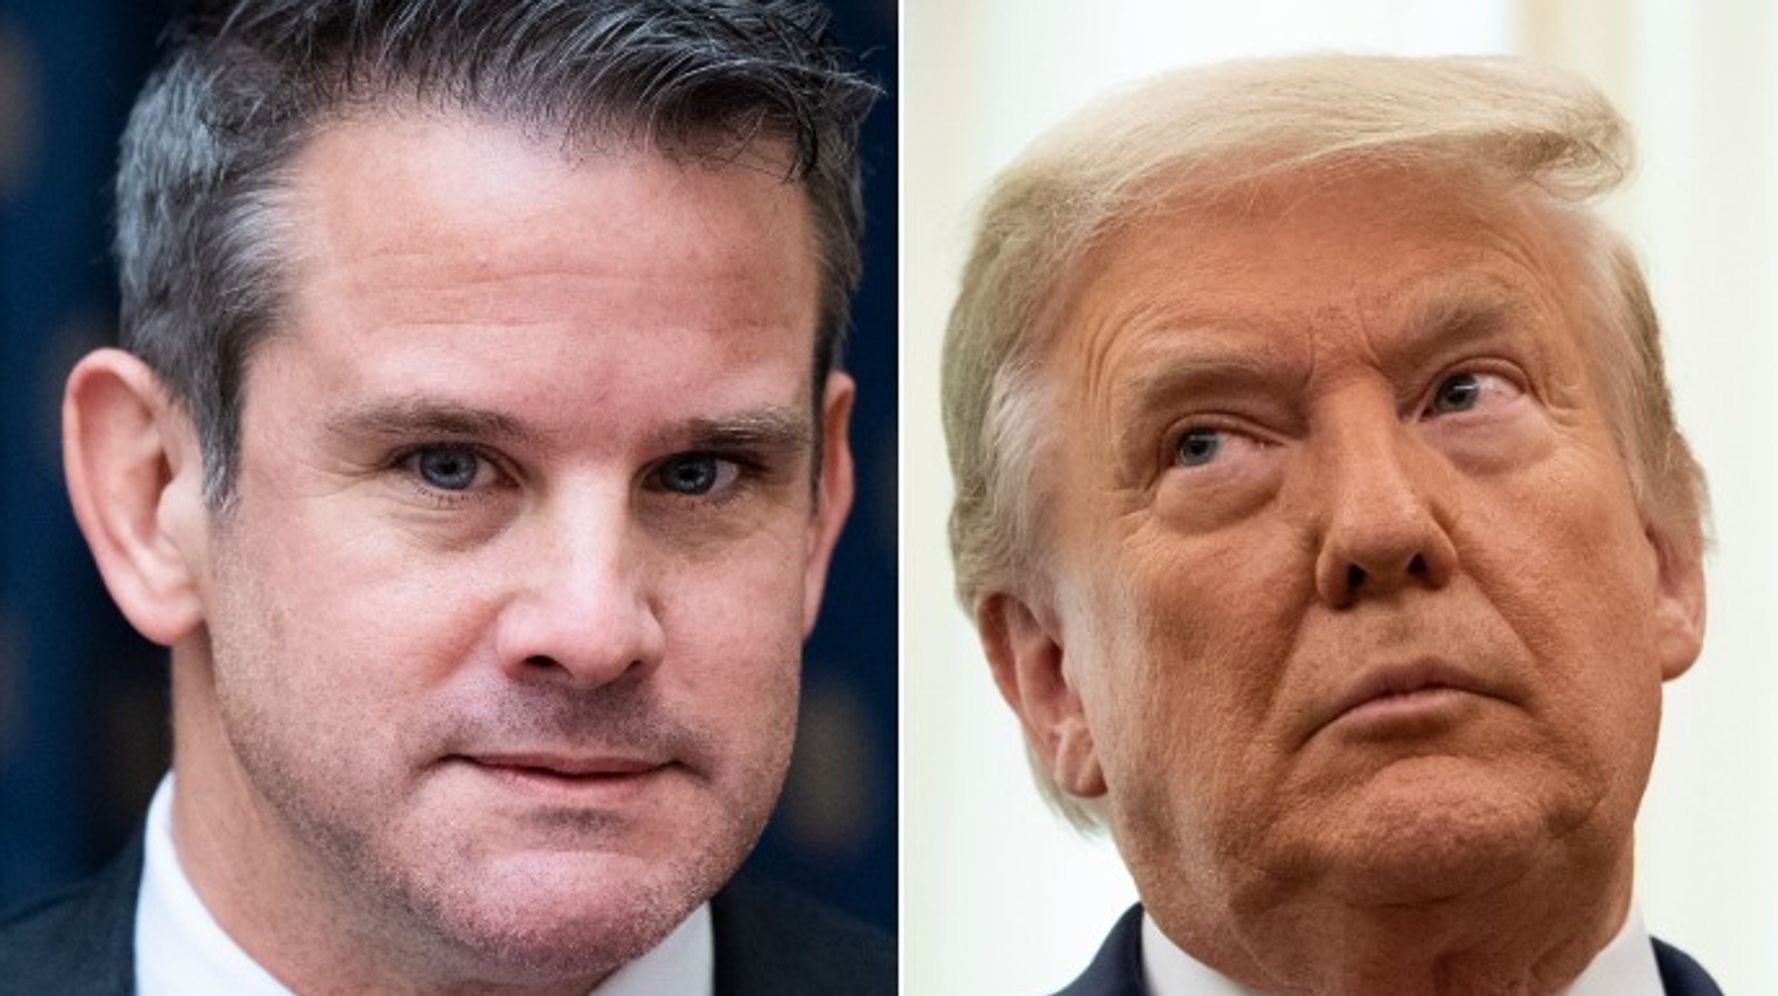 GOP Rep. Adam Kinzinger Takes A Favorite Conservative Insult, Fires It Right At Trump